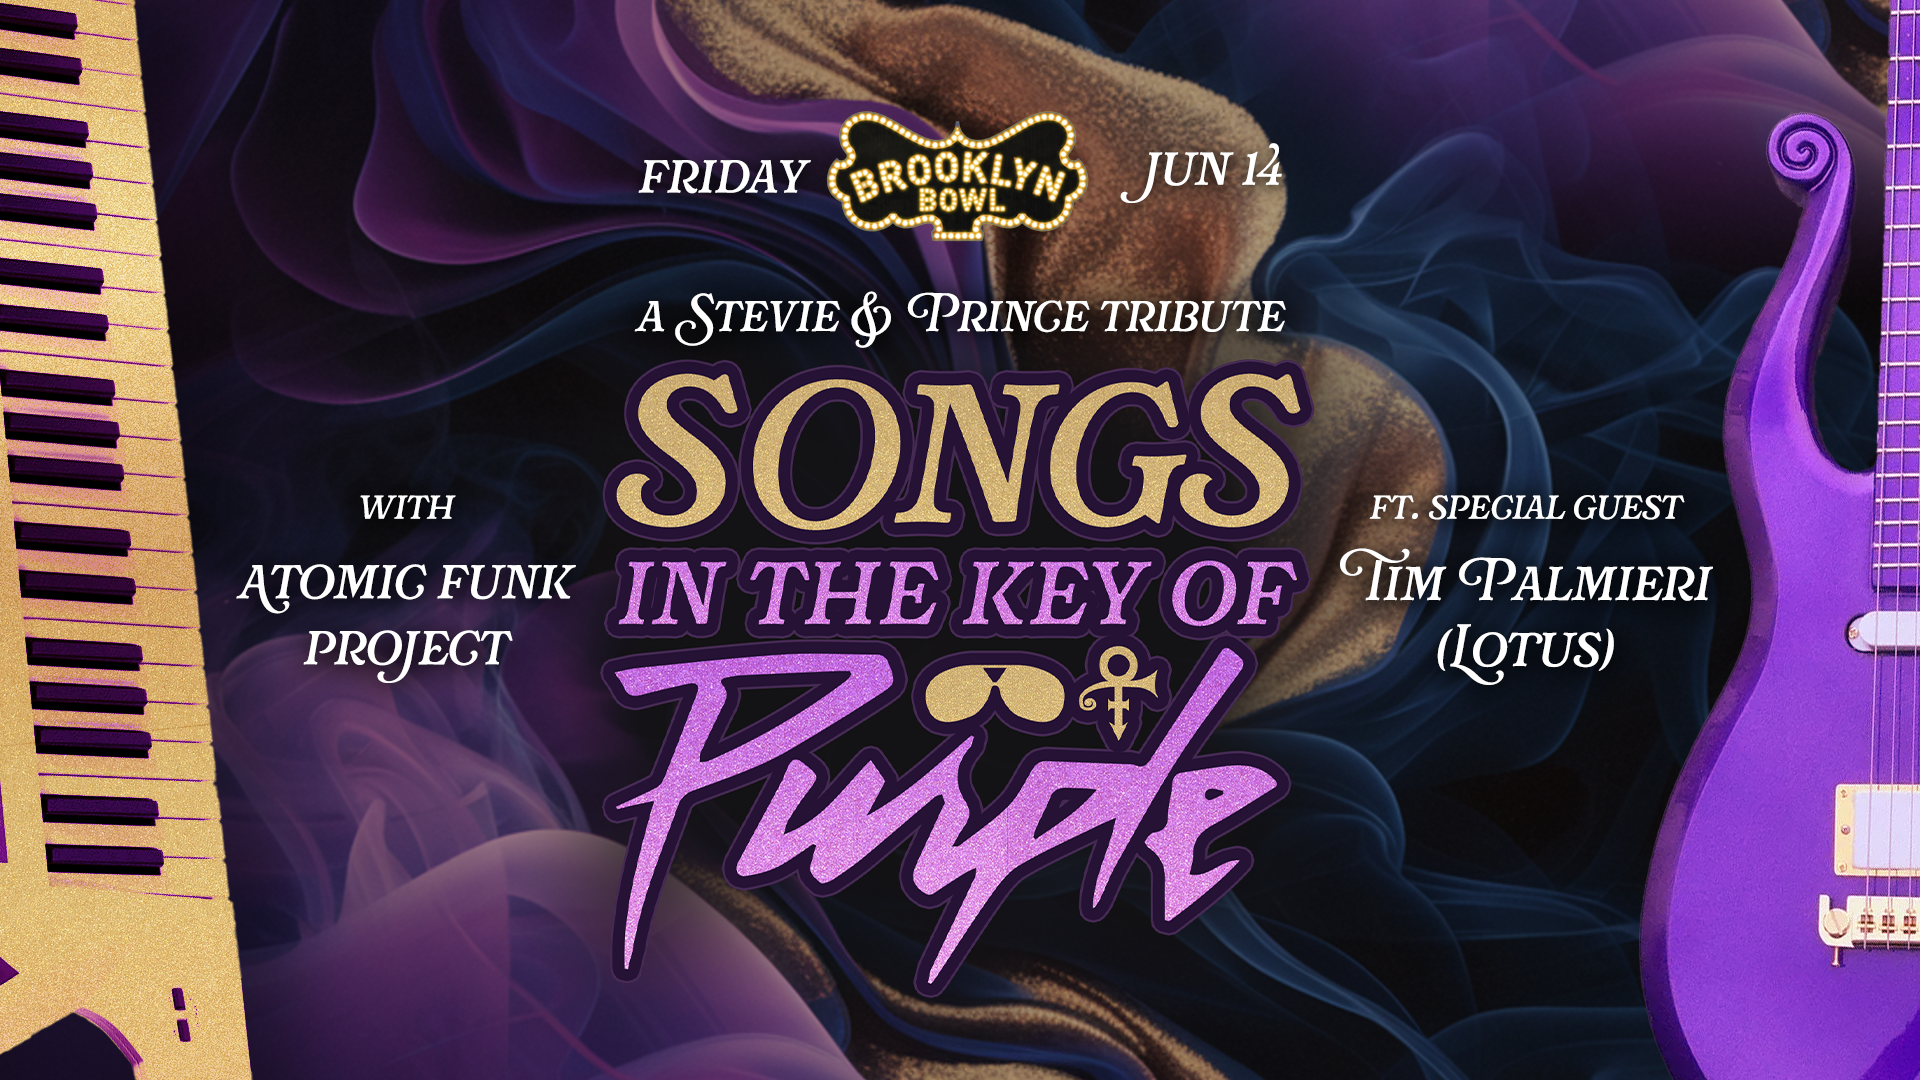 Atomic Funk Project: Songs in the Key of Purple